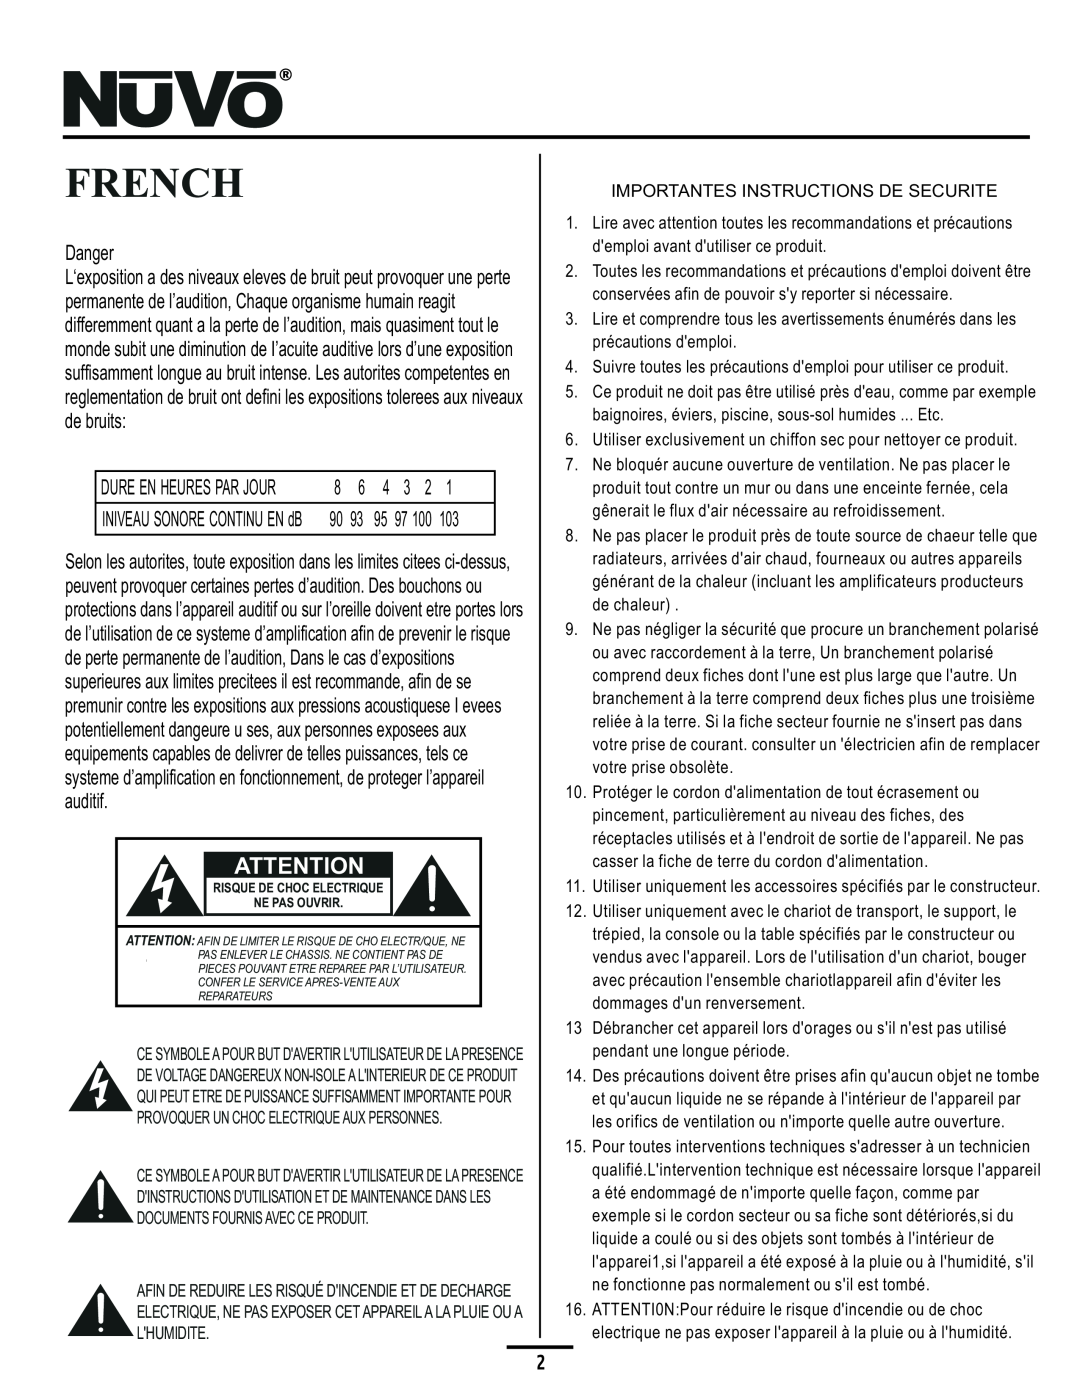 Nuvo NV-A4DS-UK installation manual French, Danger 